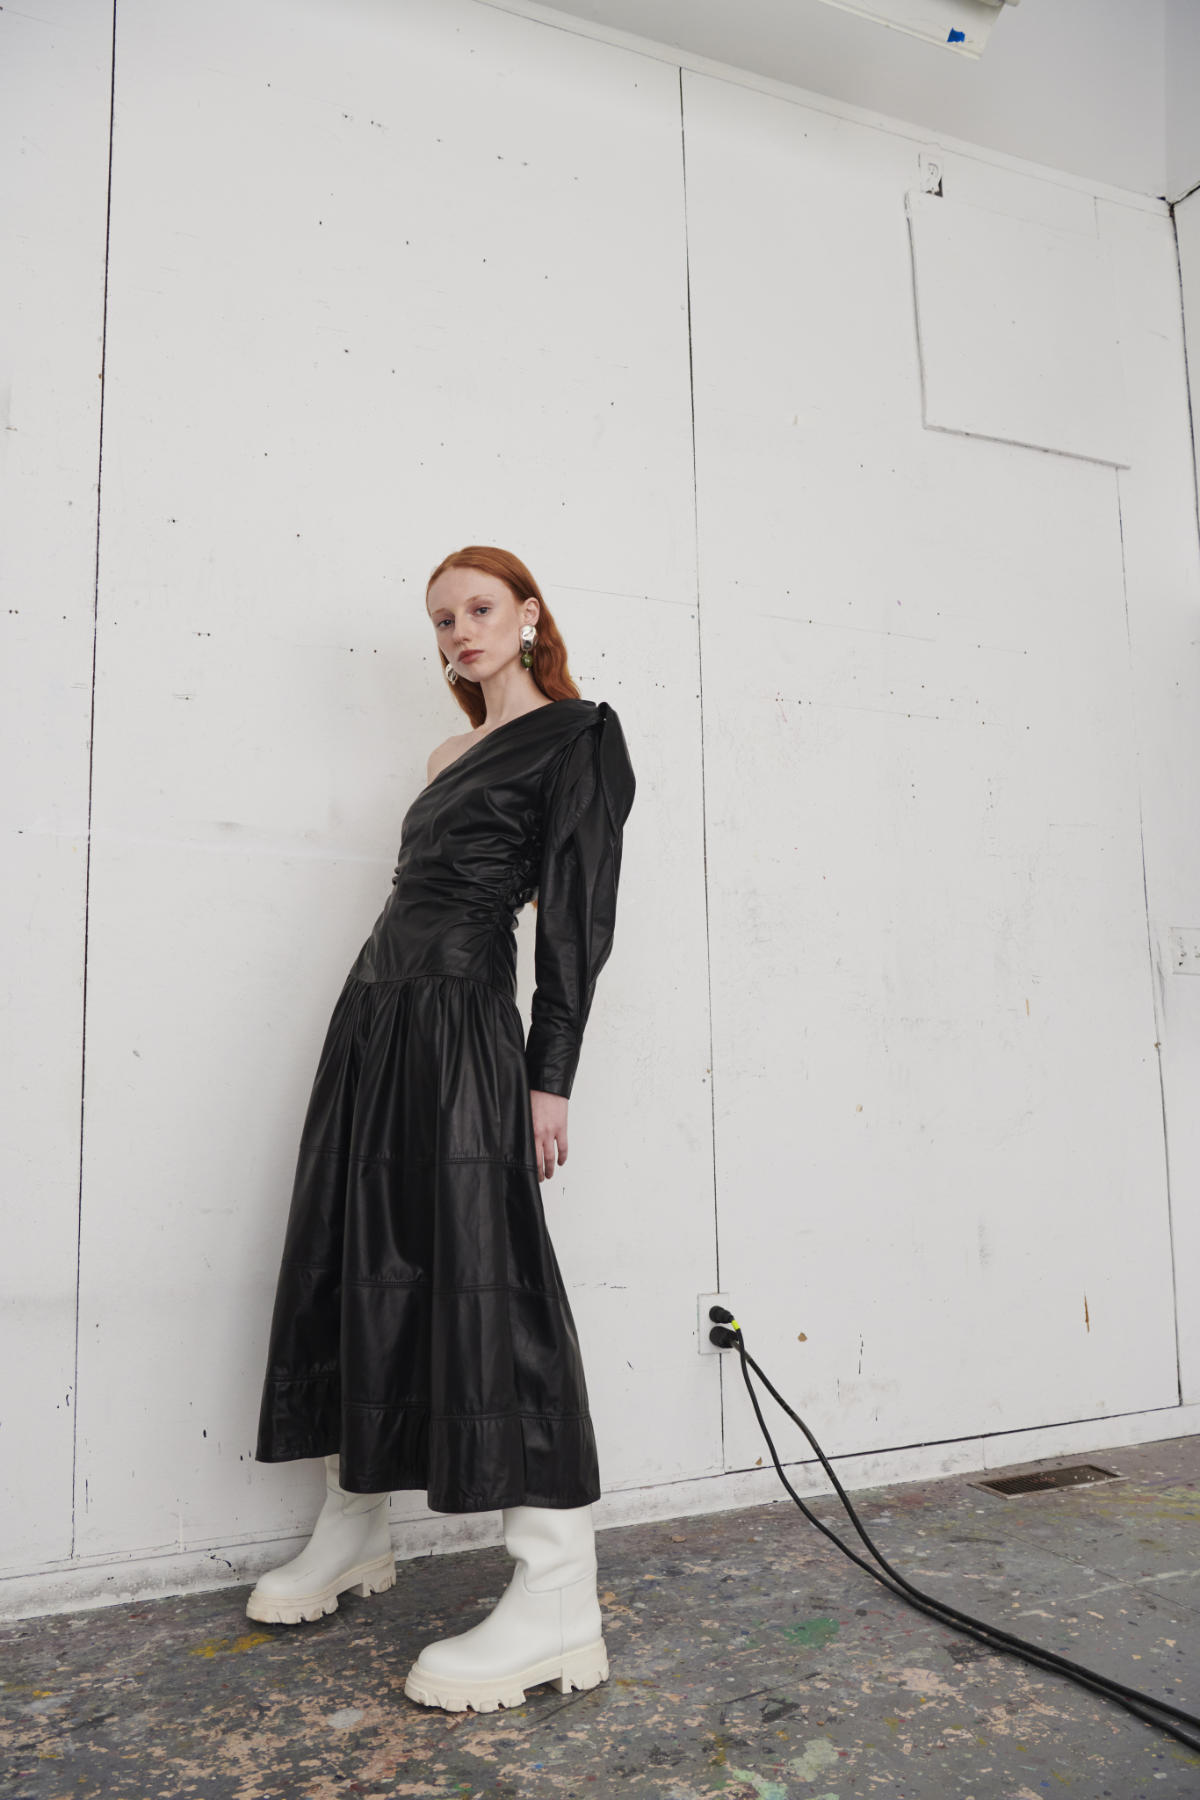 Tanya Taylor Presents Her Fall 2022 RTW Collection